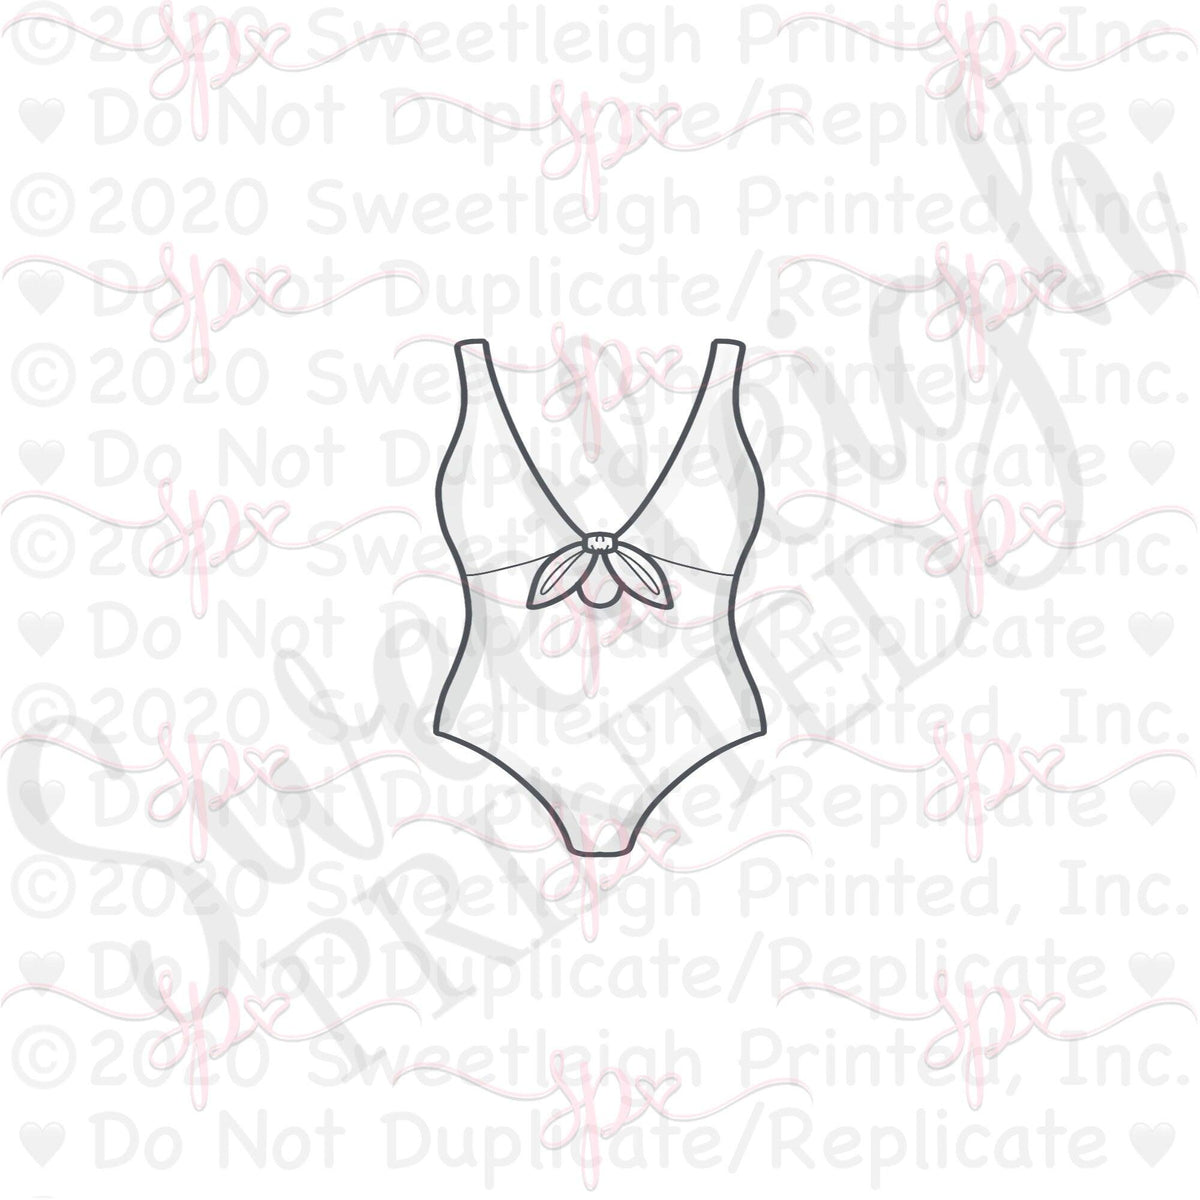 Full Knotted V Bathing Suit Cookie Cutter - Sweetleigh 